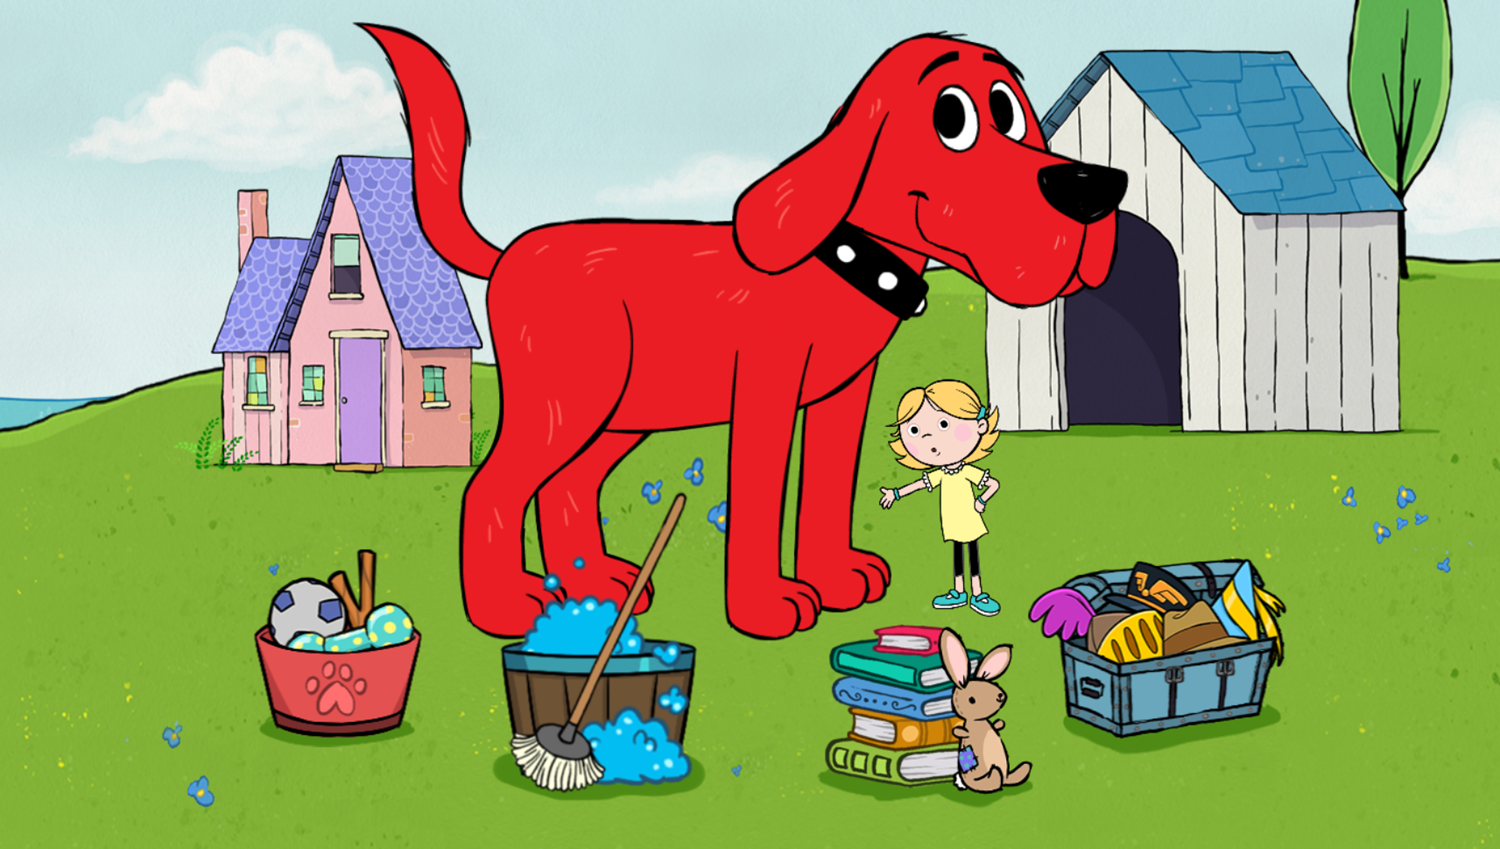 Clifford the Big Red Dog: A Dog's Life Level Select Screenshot.